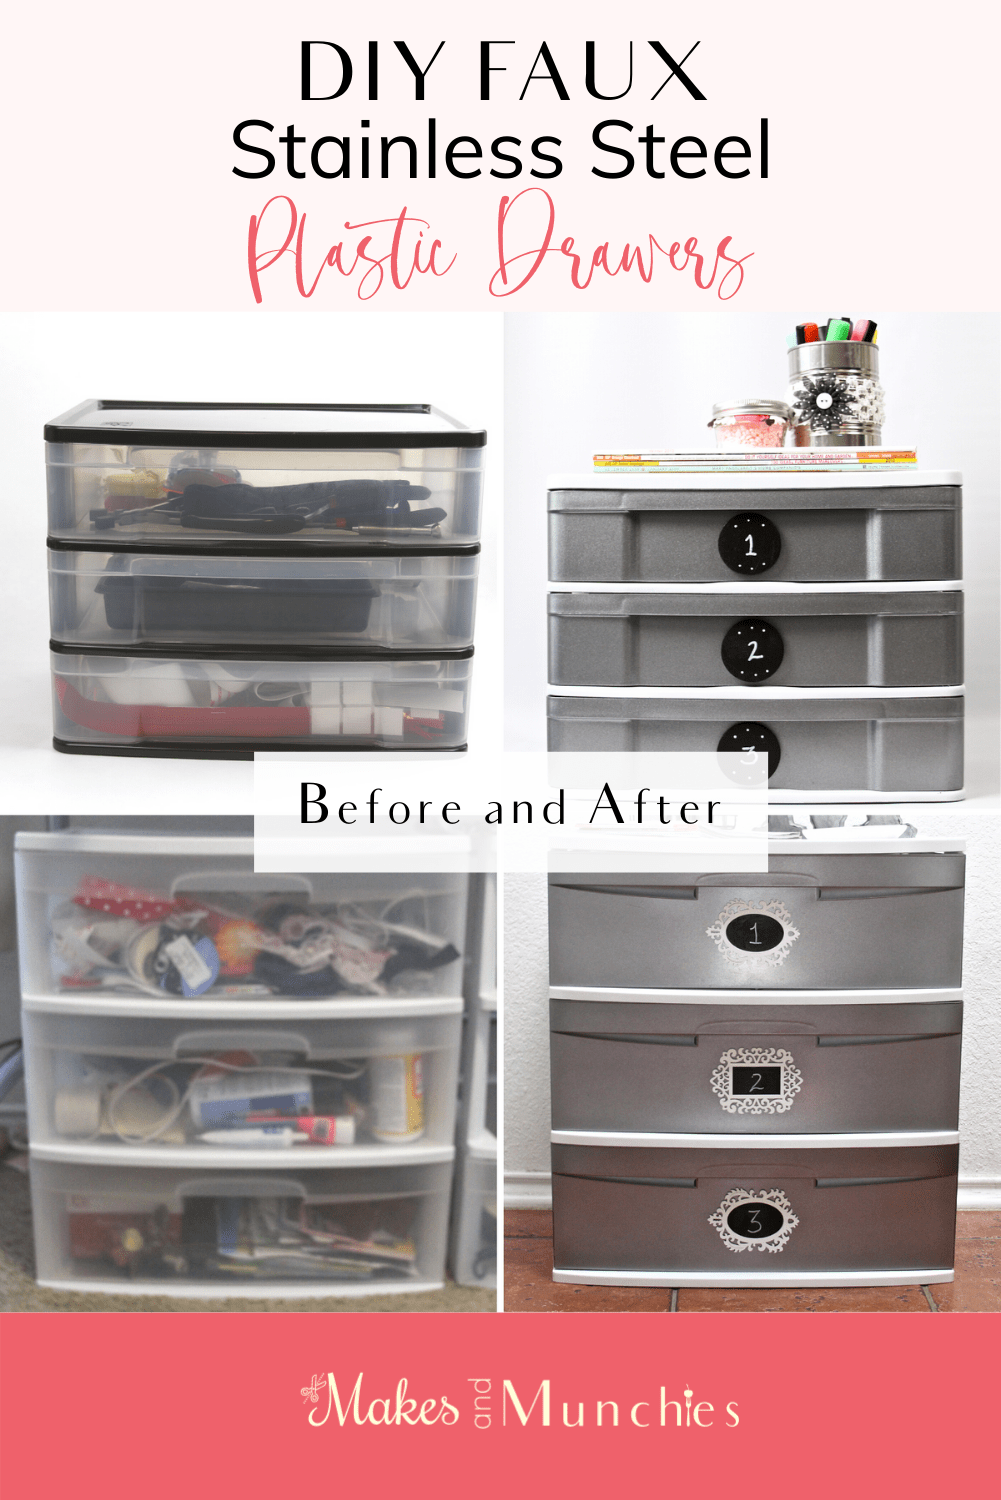 https://makesandmunchies.com/wp-content/uploads/2019/11/DIY-Faux-Stainless-Steel-Plastic-Drawers.png